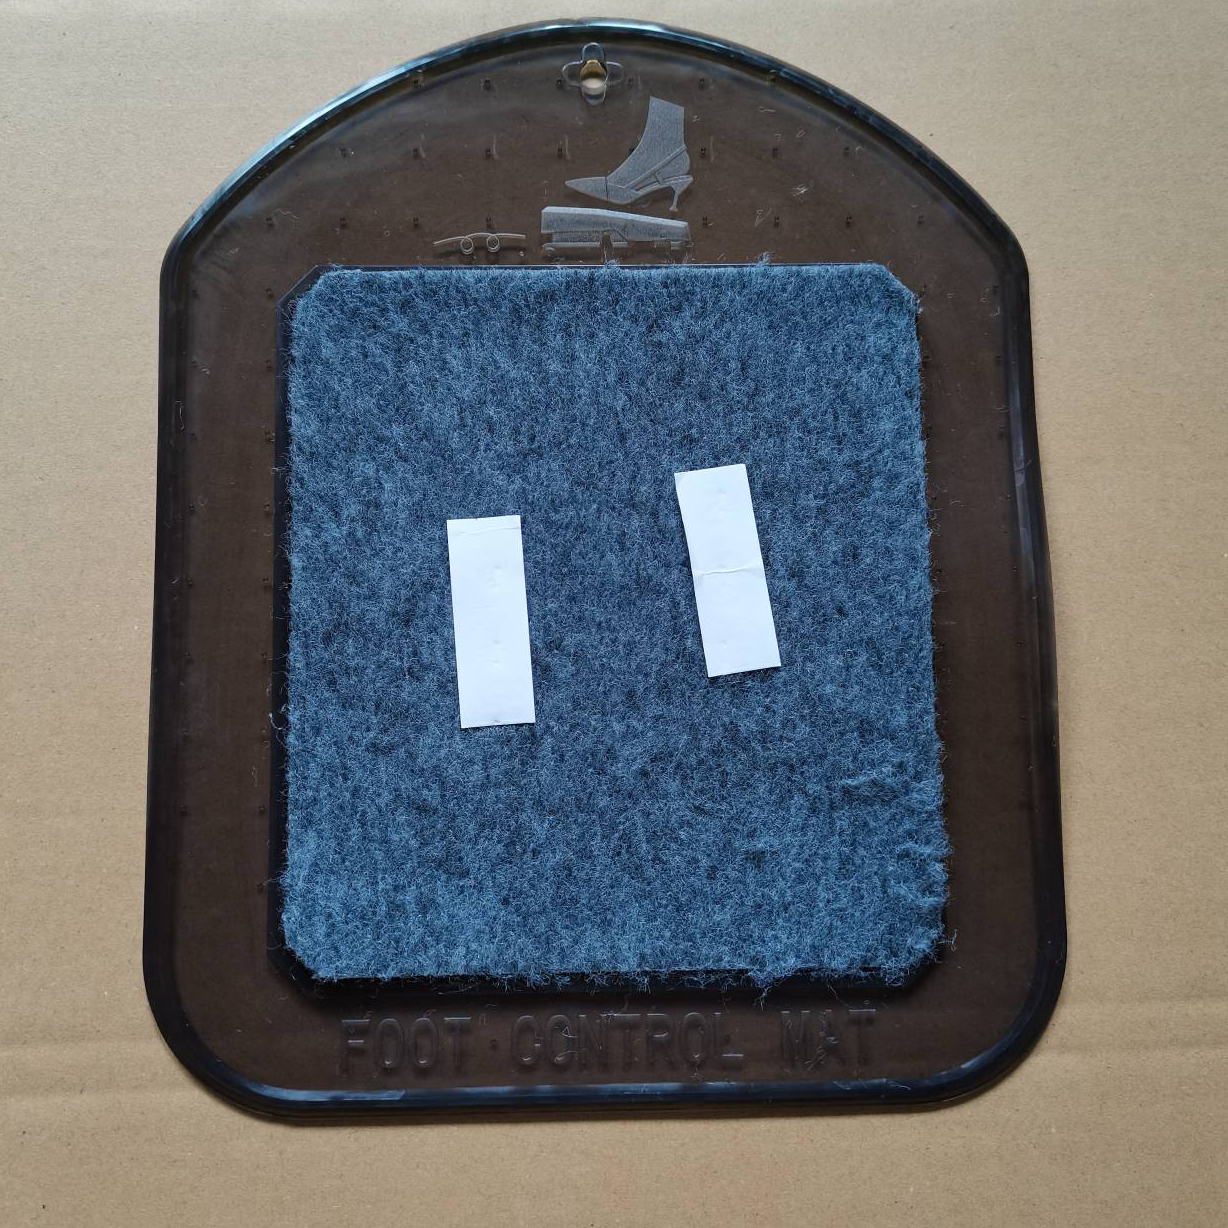 Non-slip Pedal Pad for Sewing Machine/serger 